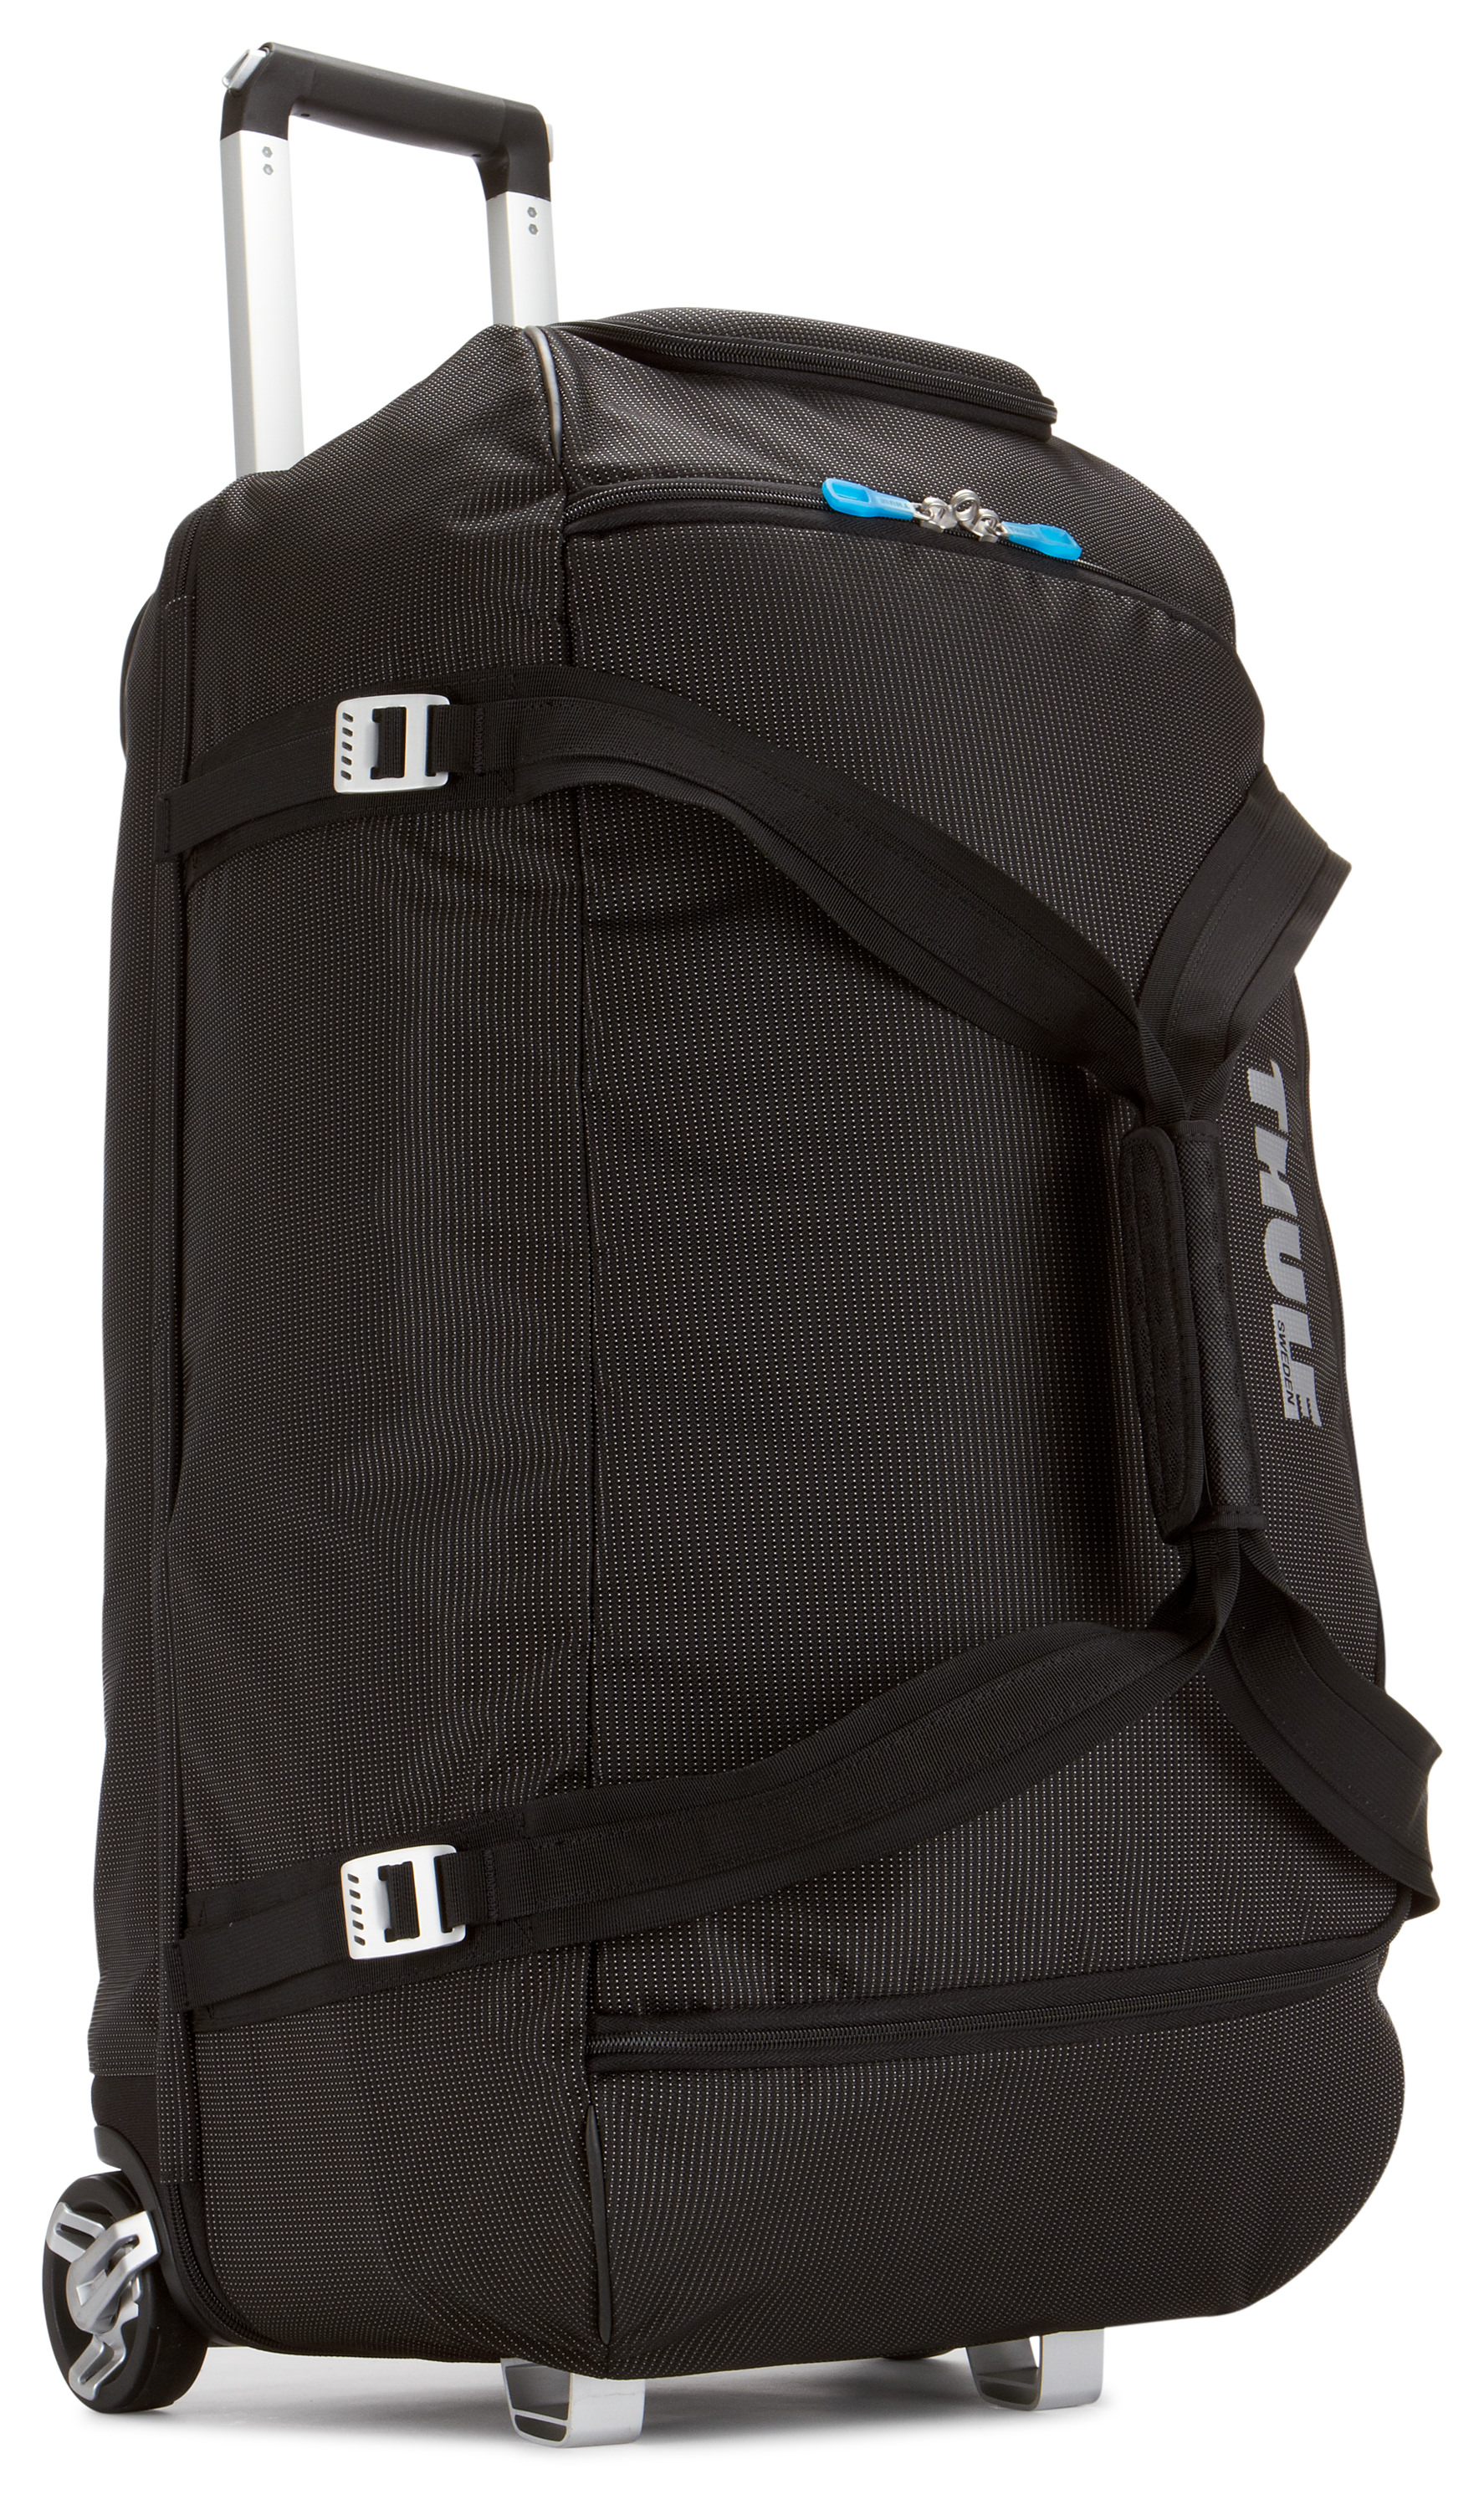 Thule Rolling Duffle Travel Bag Review | Cool Things Collection | www.bagssaleusa.com